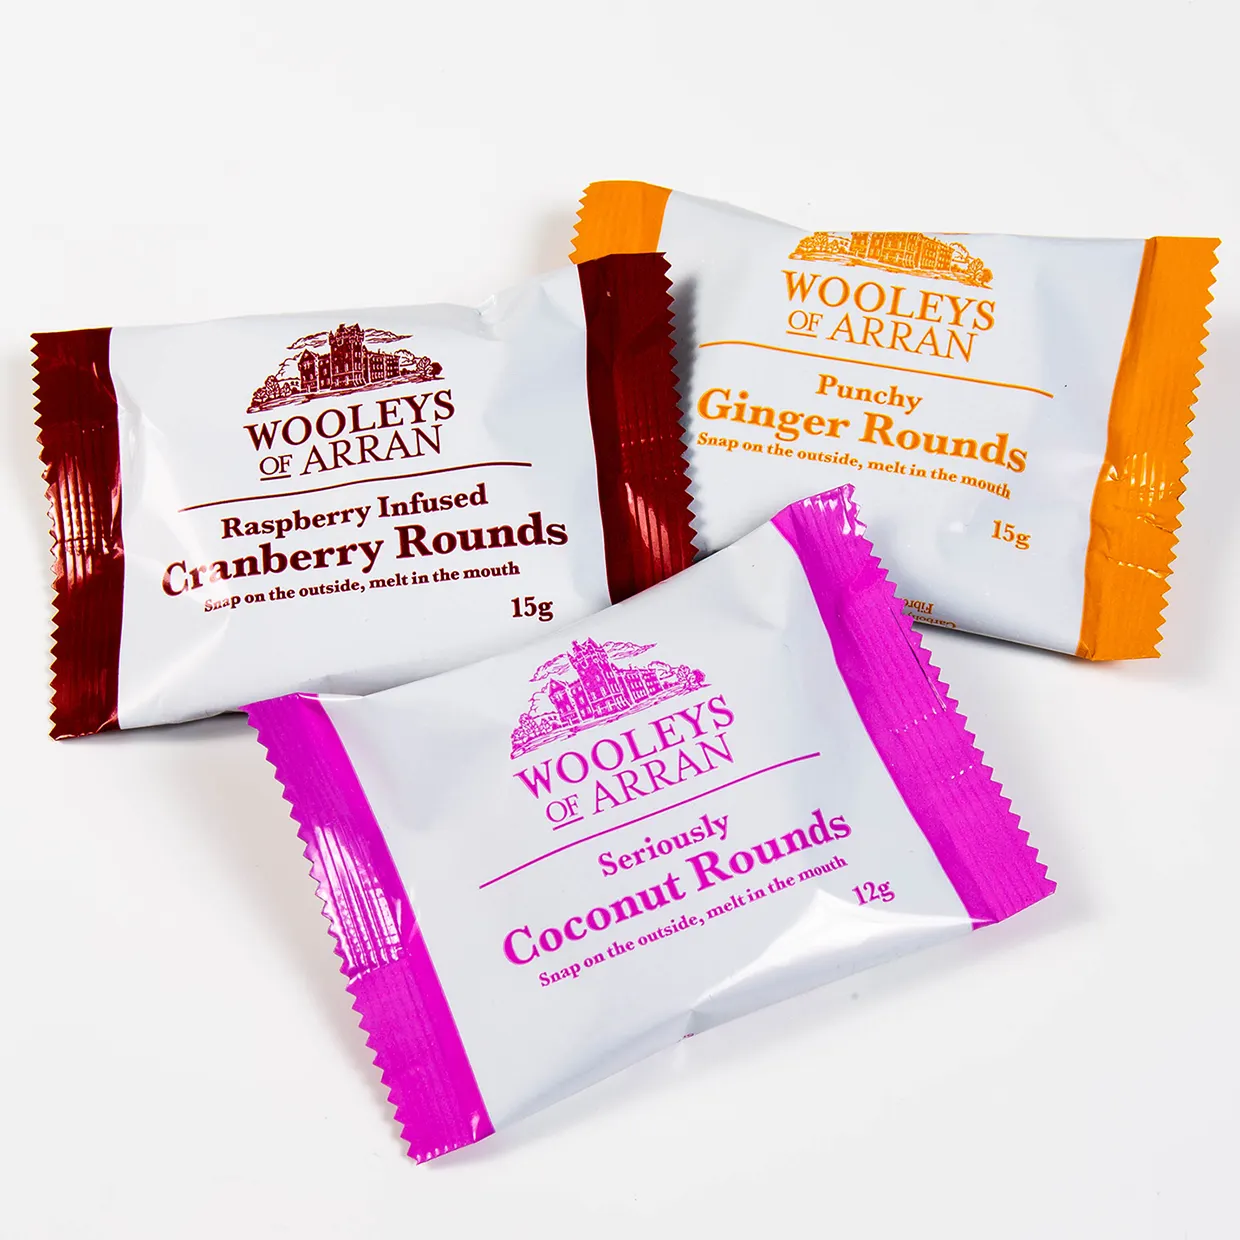 Wholesale food Wooleys 2 pack mixed box sold in 20 x 2 pack cranberry ginger coconut UK baked goods oat biscuits snacks